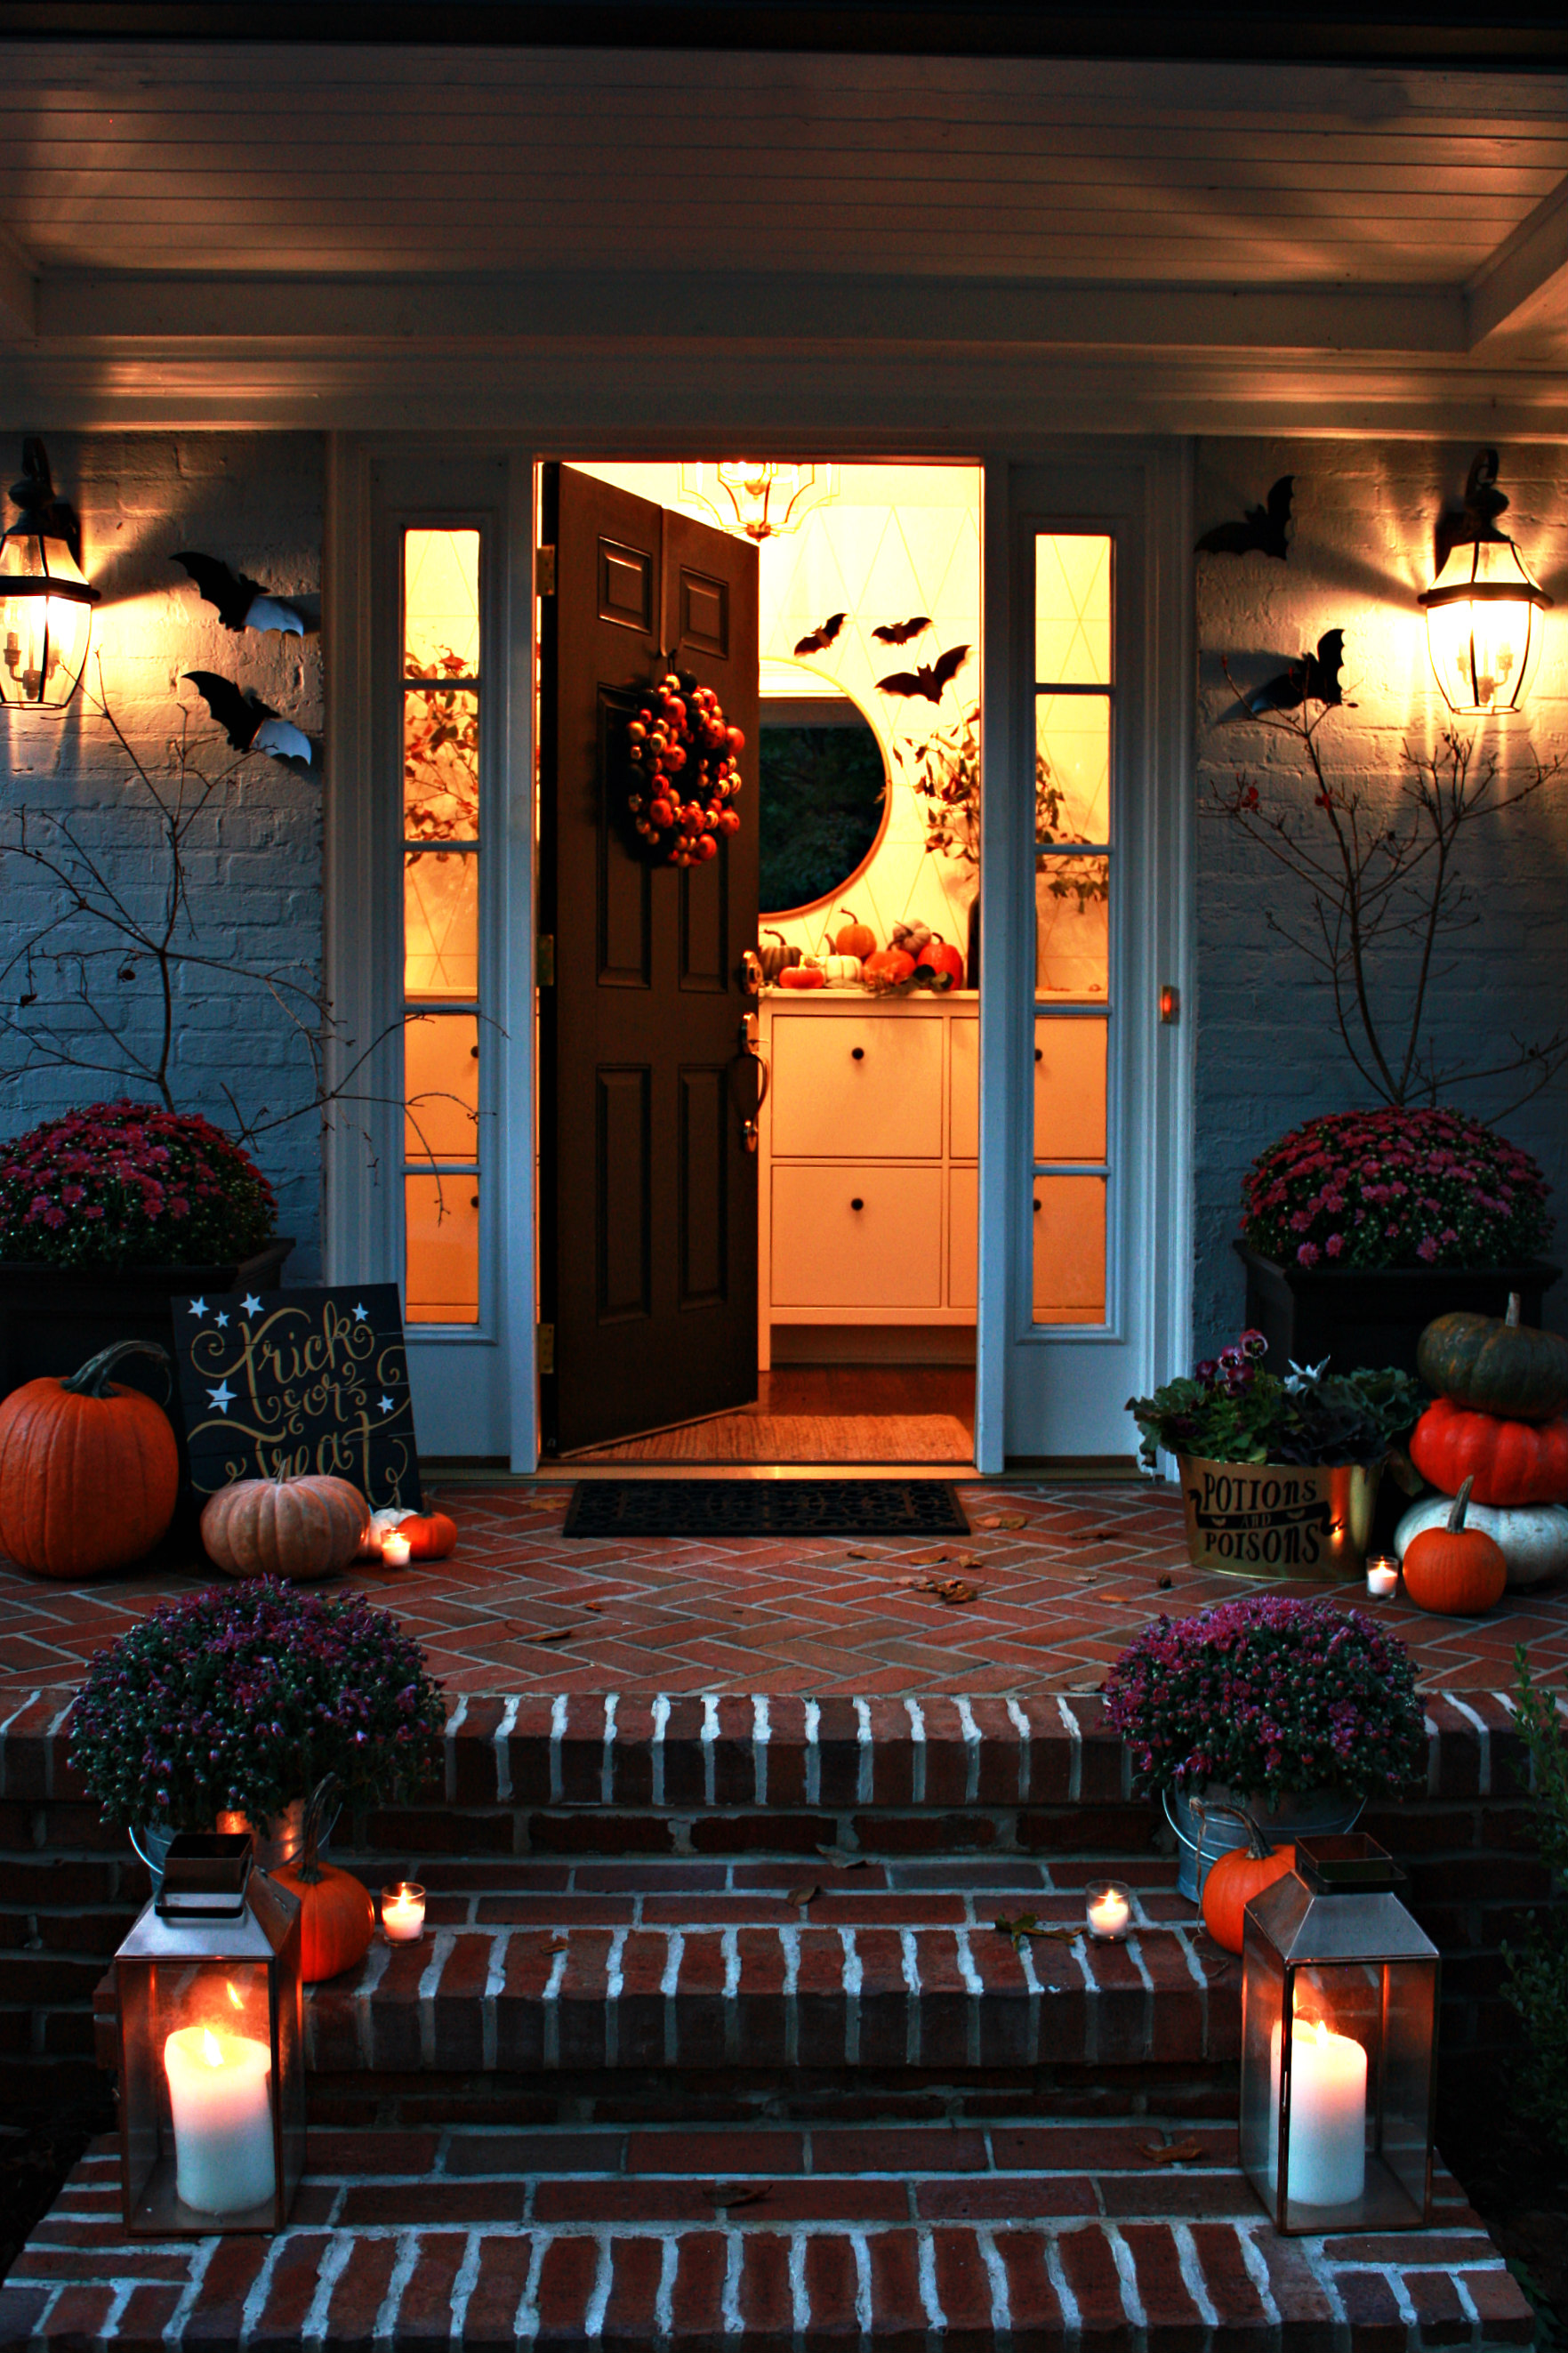 Halloween Porch at Night - Nest of Posies